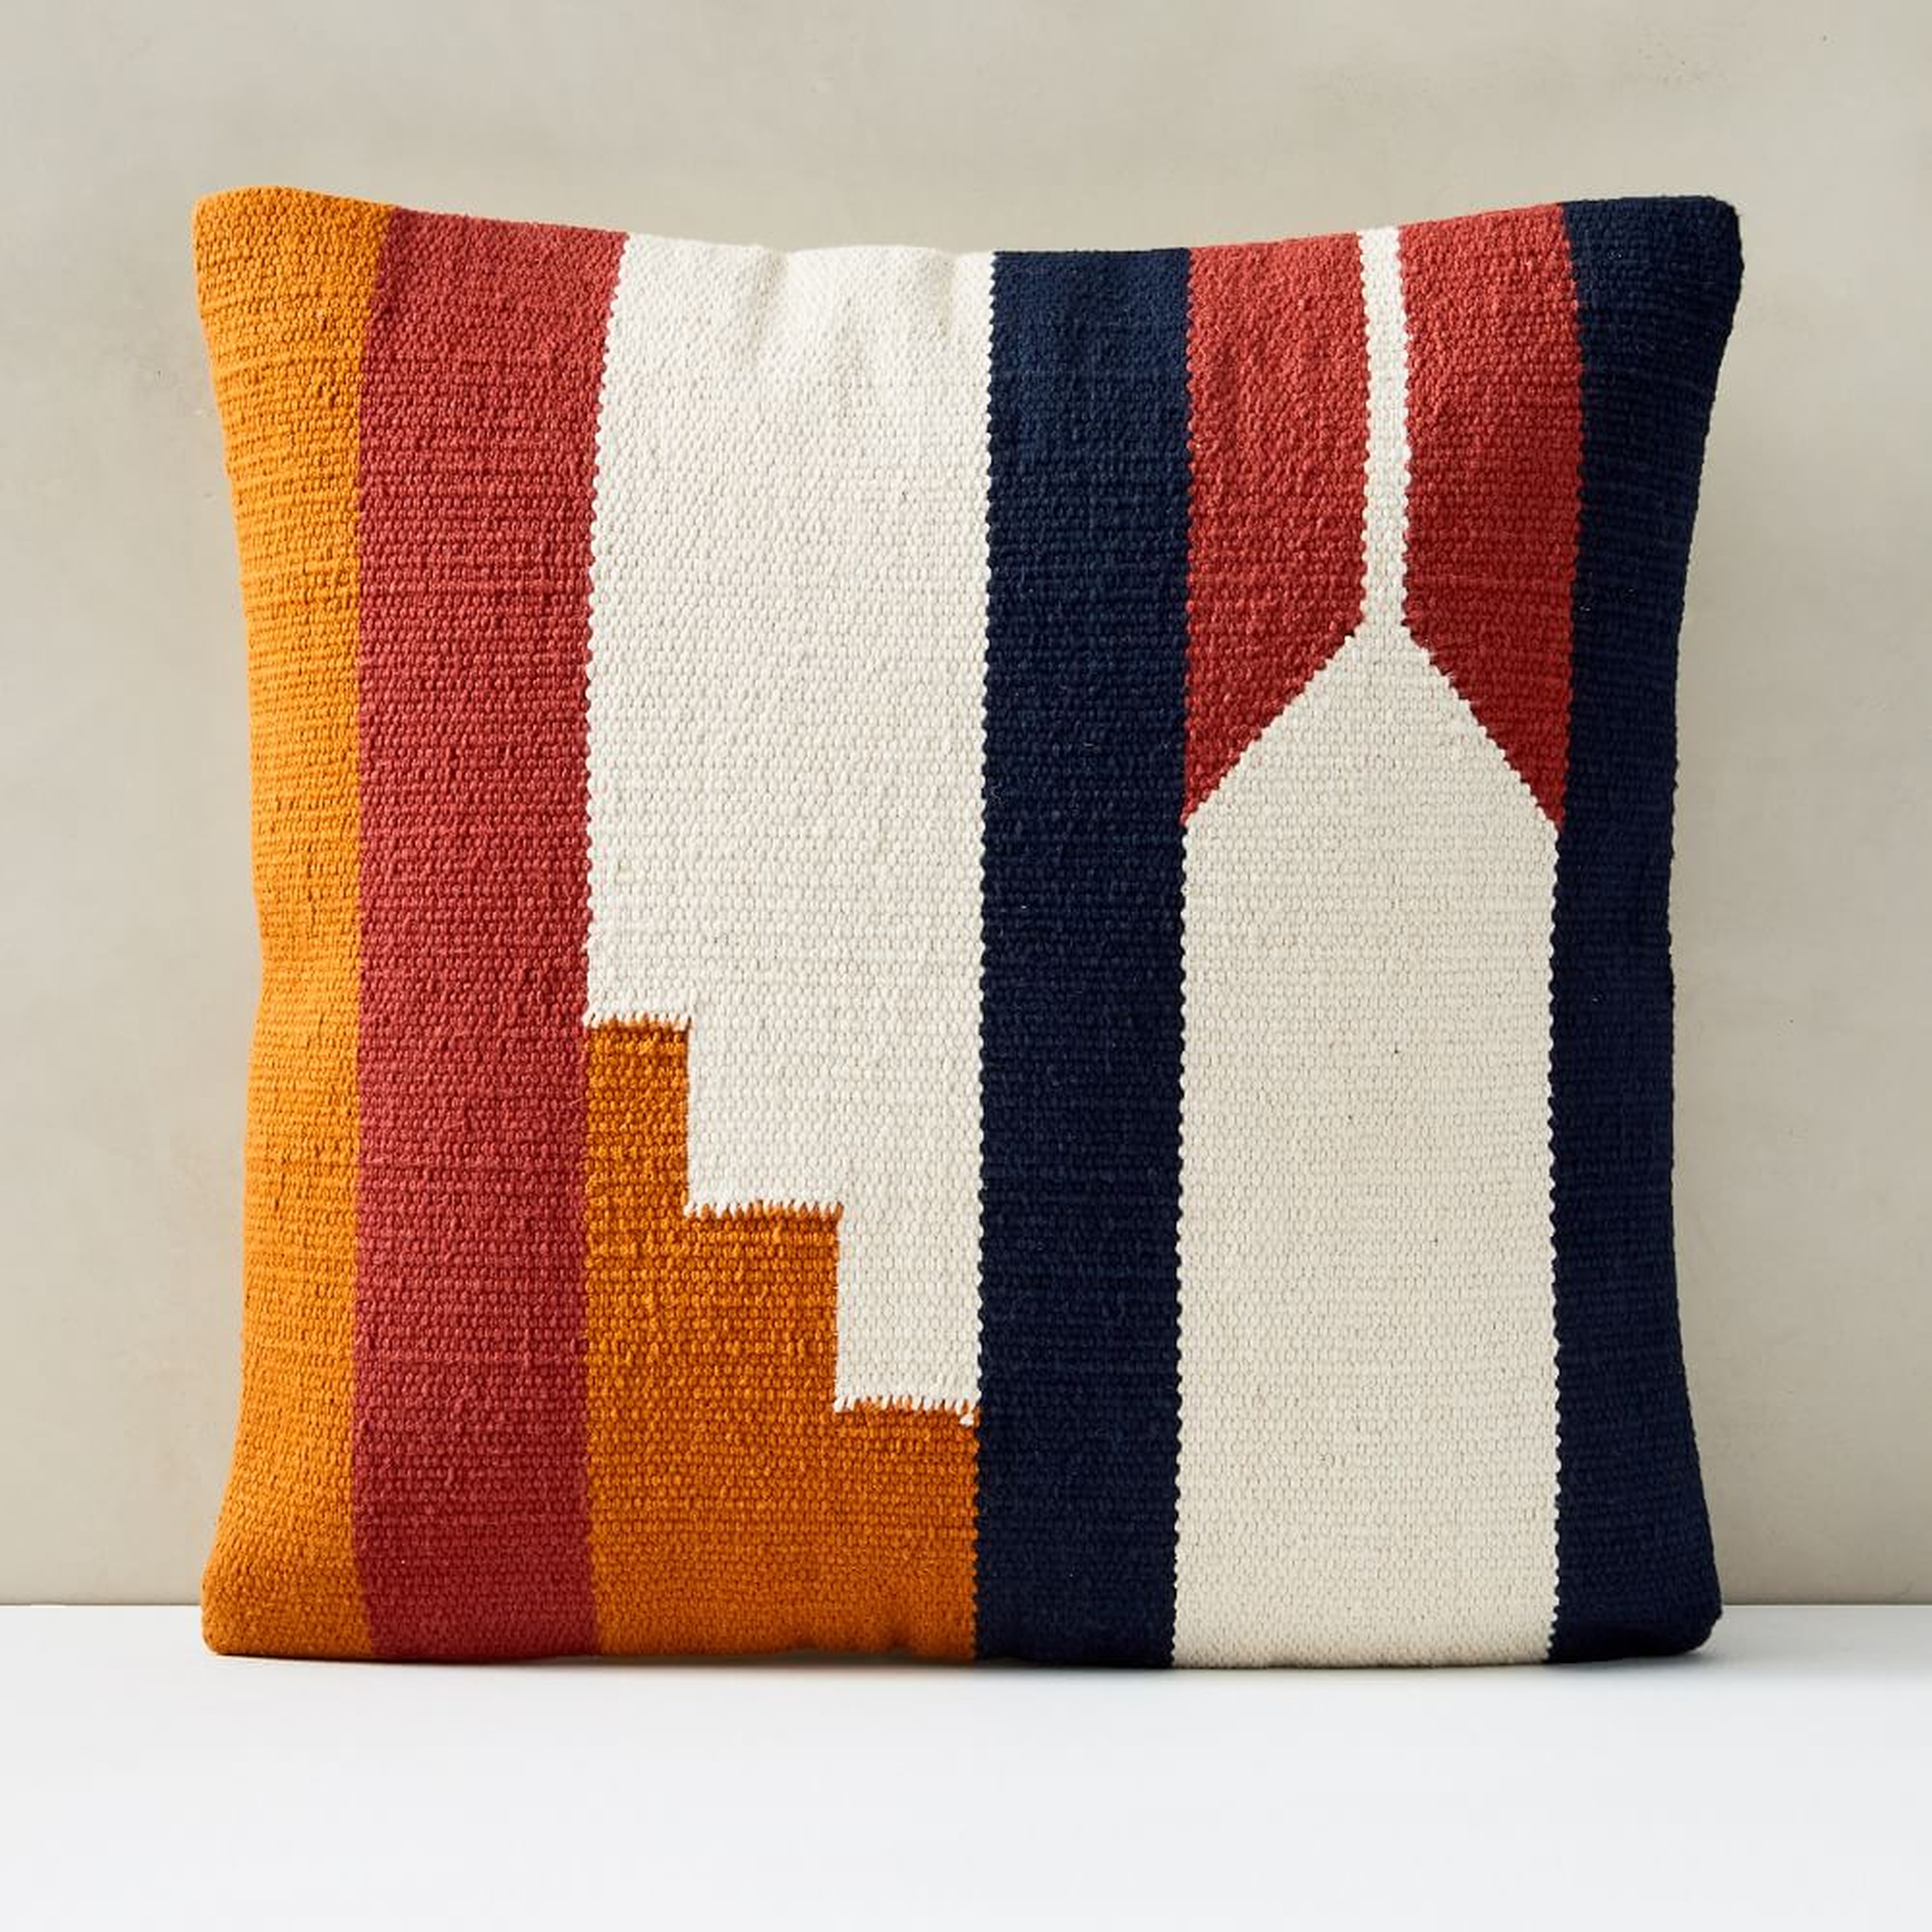 Woven Alta Pillow Cover, 18"x18", Ginger, Set of 2 - West Elm